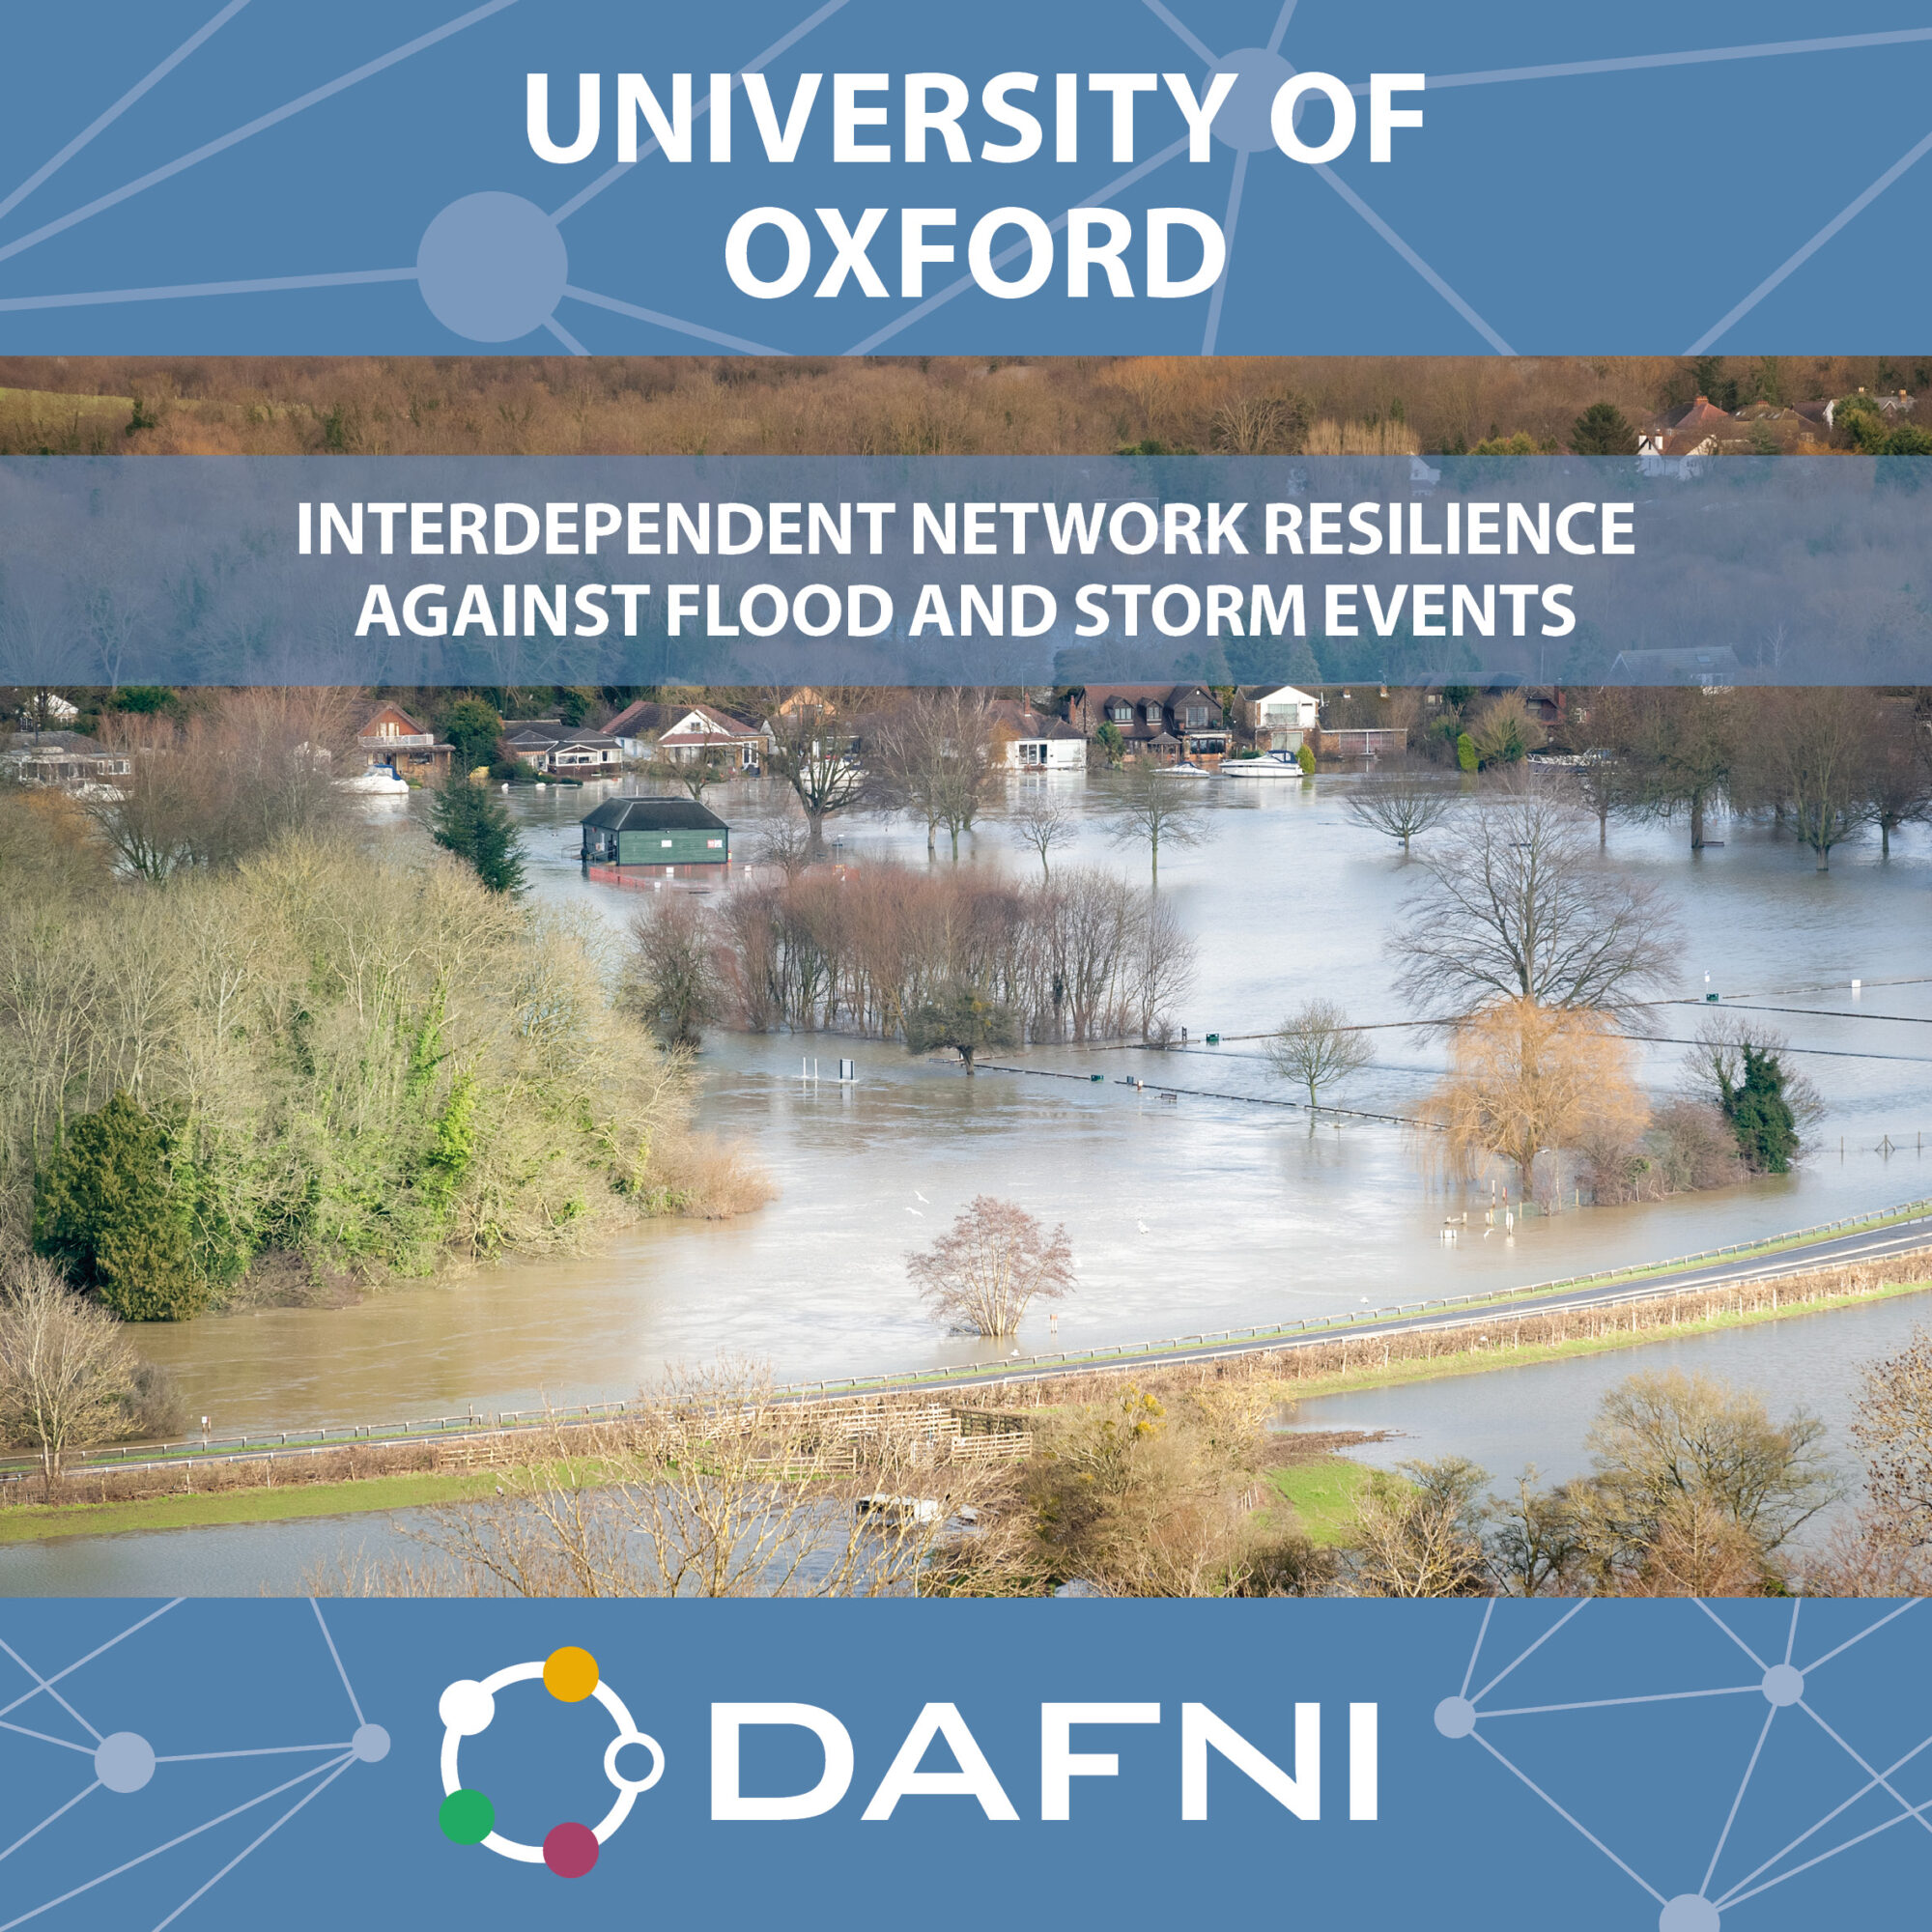 University of Oxford - Interdependent network resilience against flood and storm events